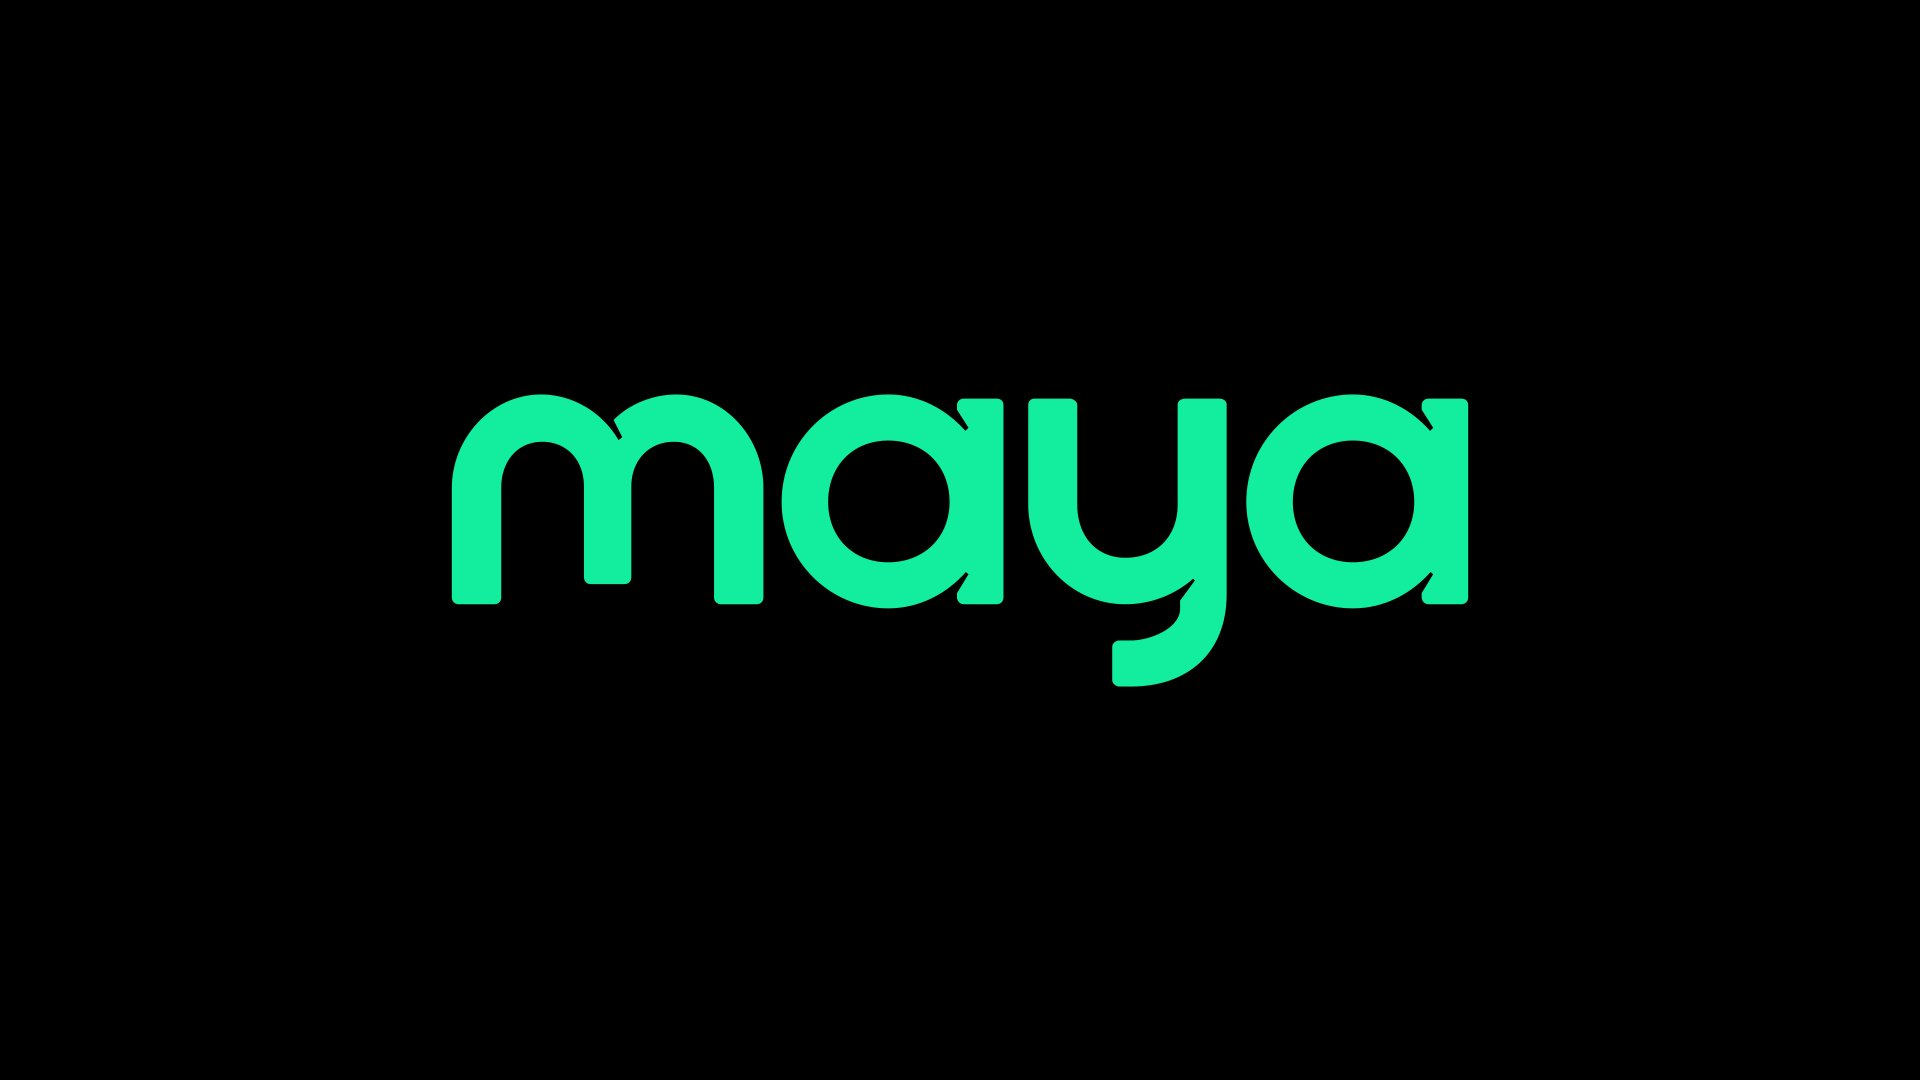 Get up to ₱3,000 cashback and gift certificates with Maya Credit!